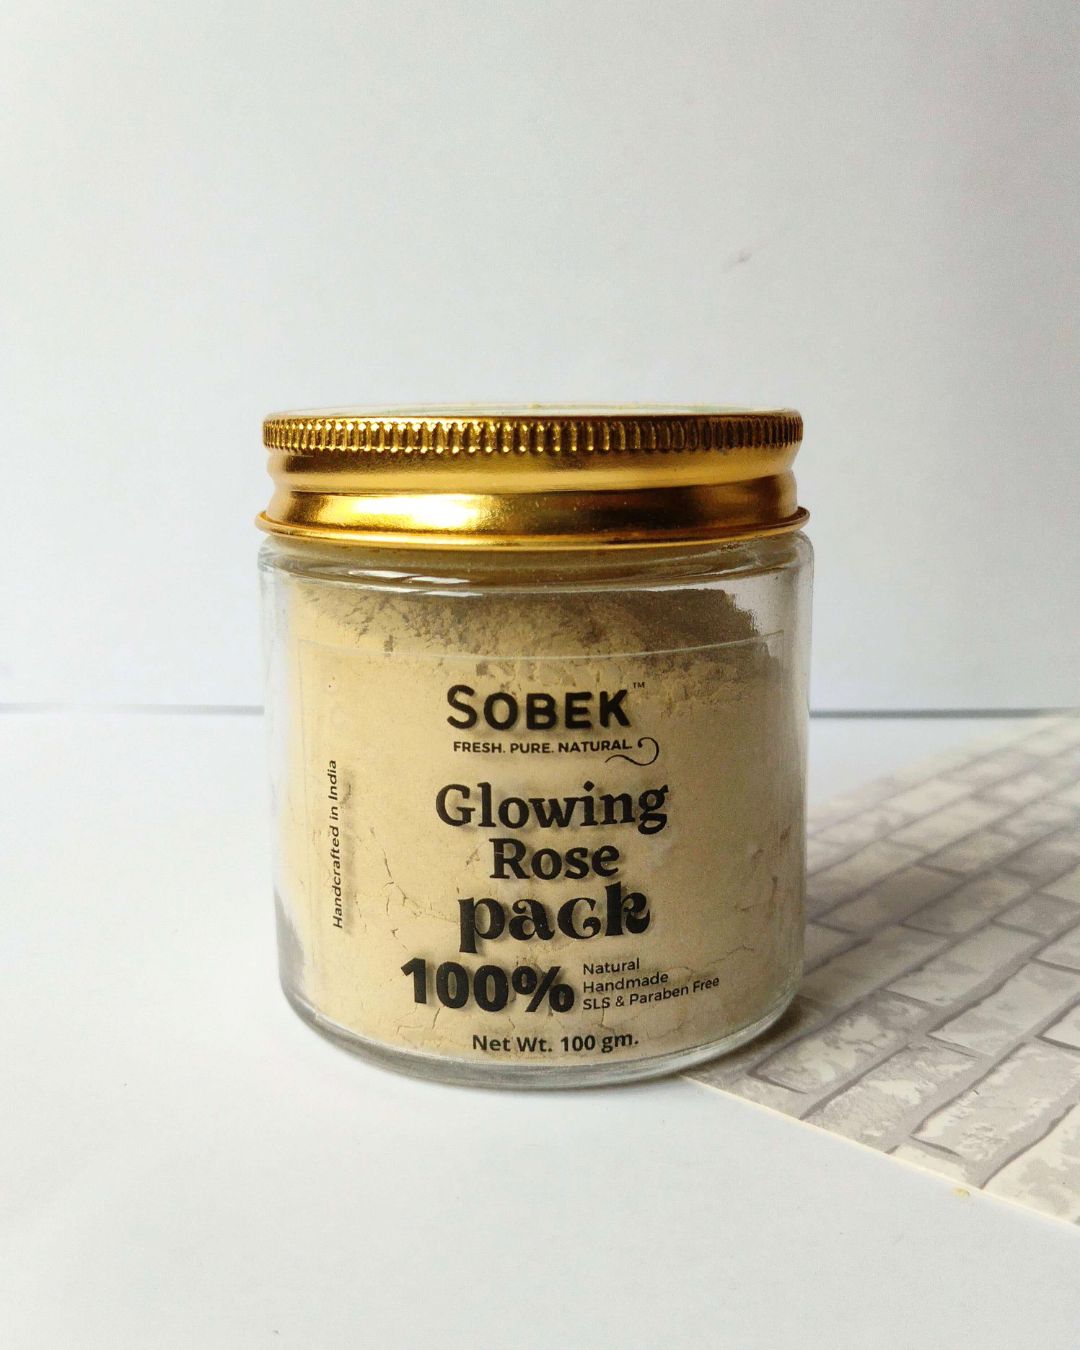 Glass jar with sobek glowing rose face pack on white backdrop